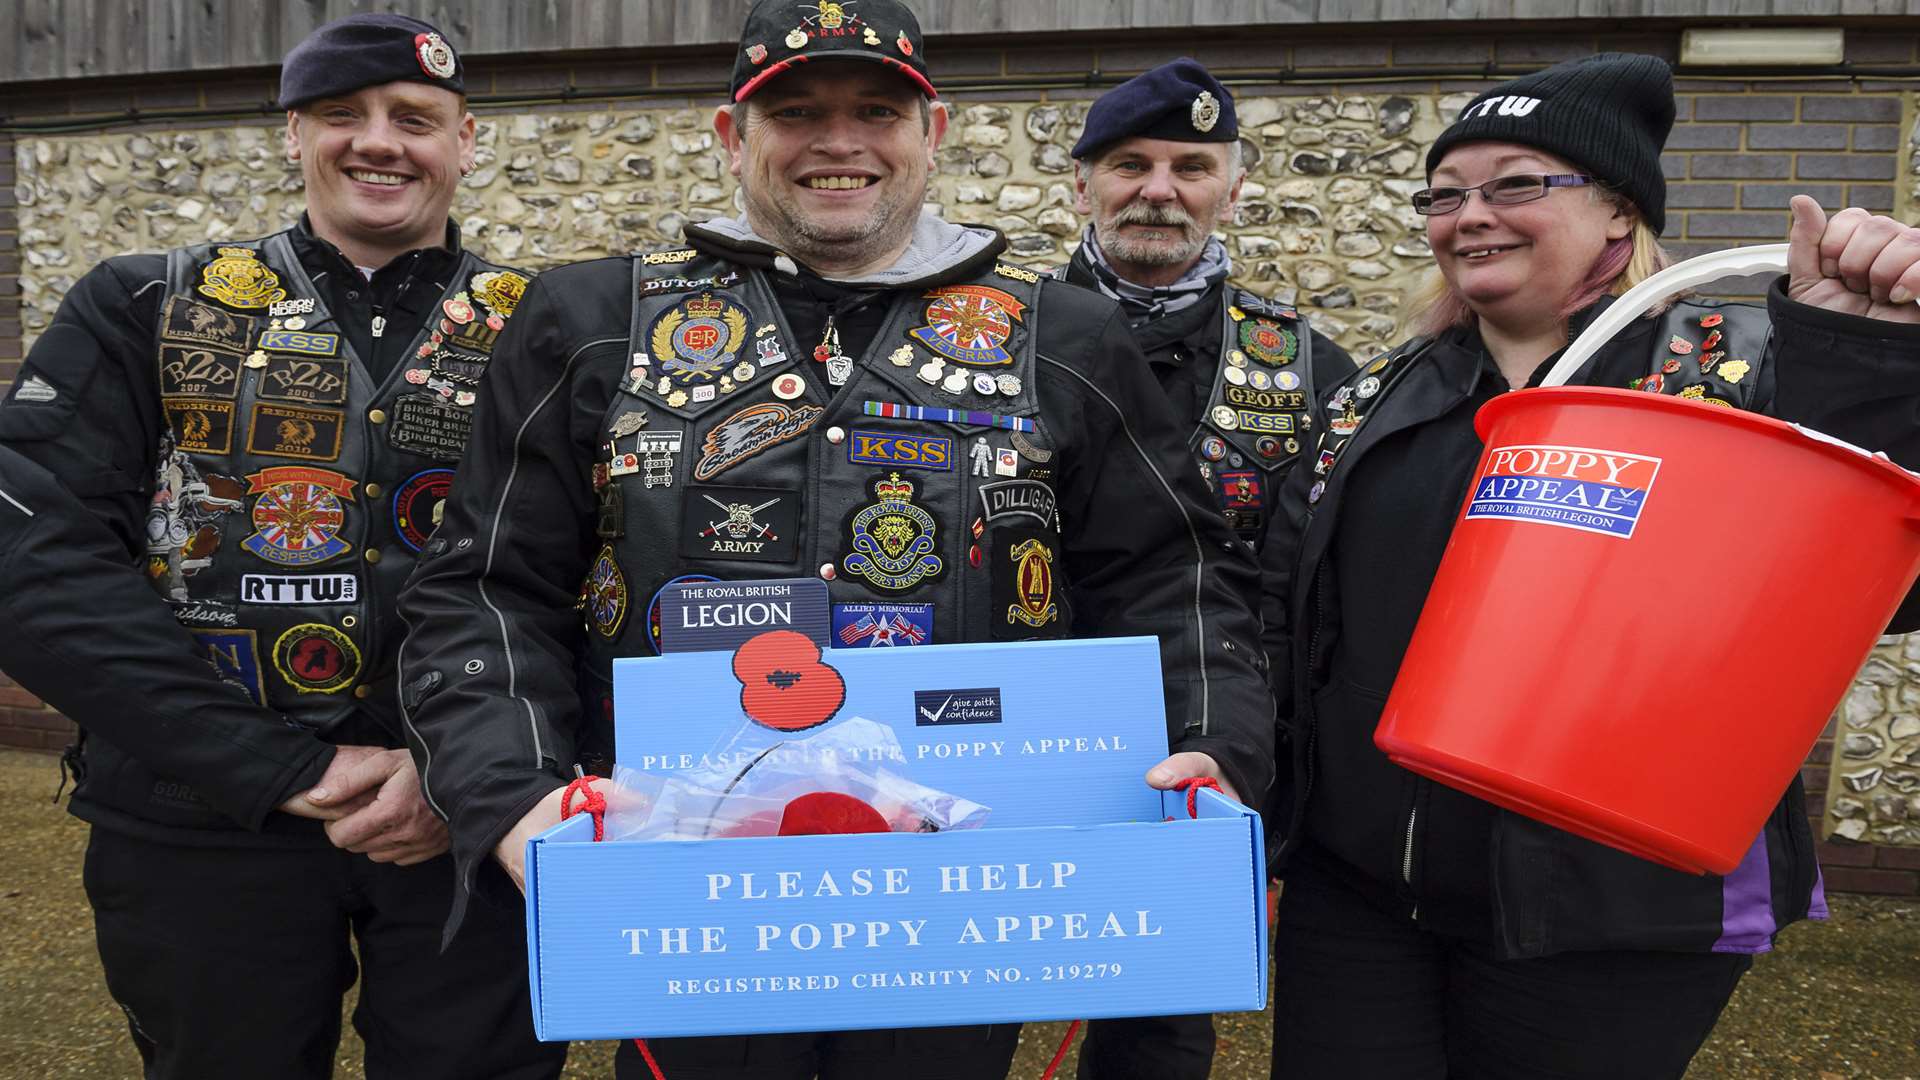 Sean Miles, Neil Holland, Geoff Purvor and Mel Cooper, from the Royal British Legion Riders branch